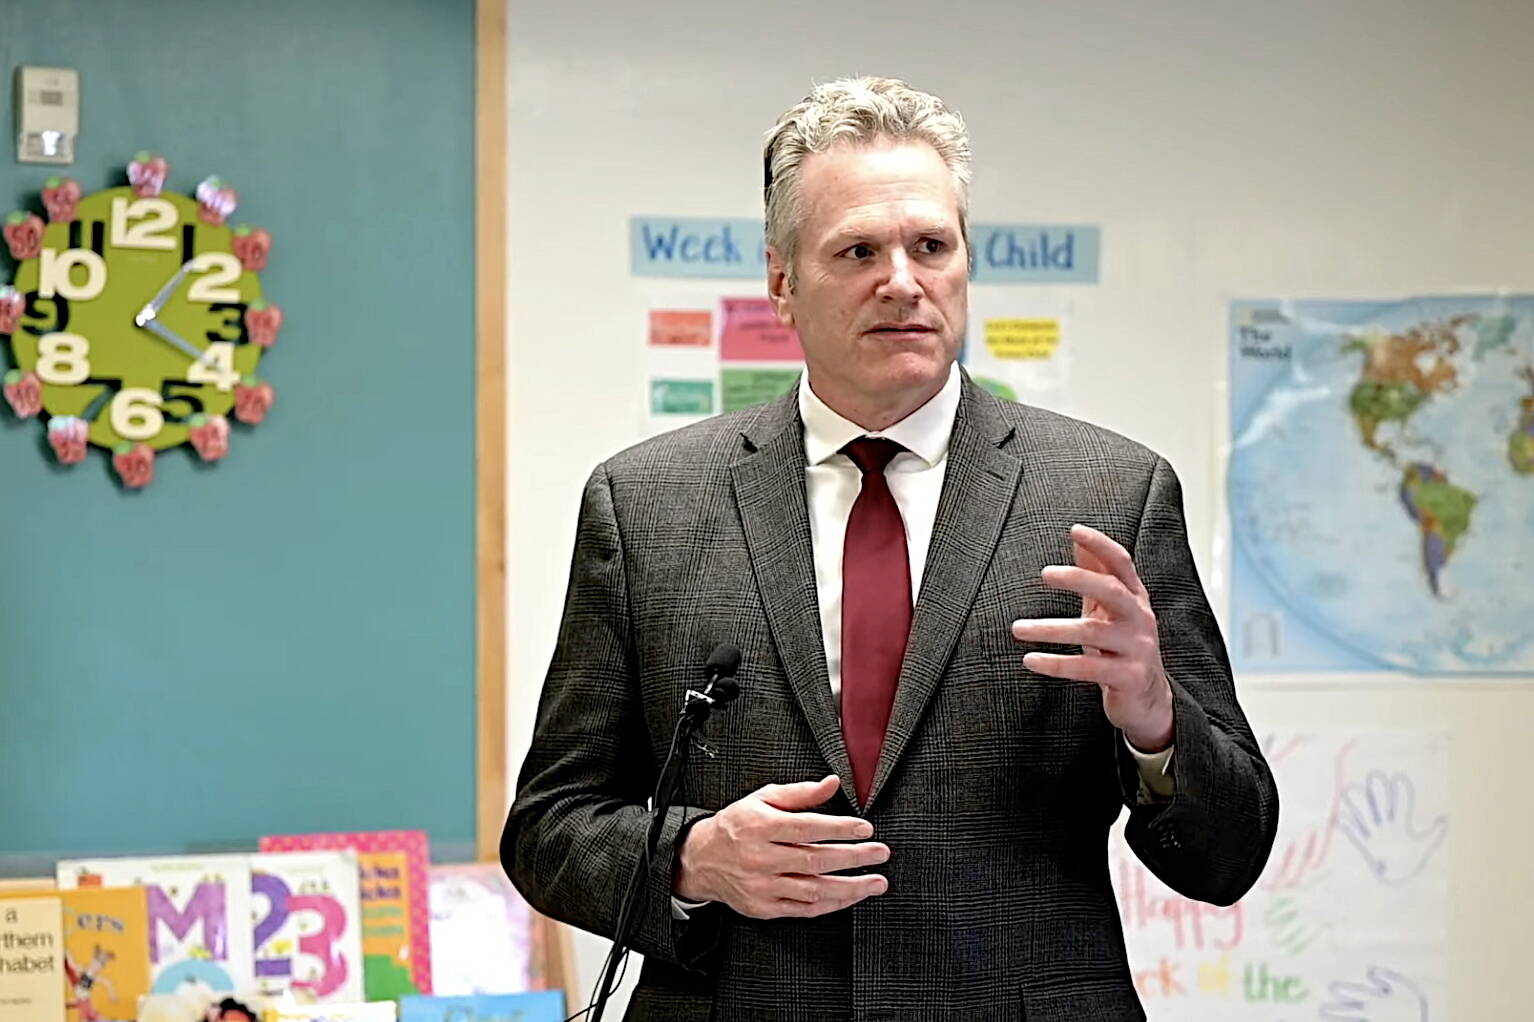 Gov. Mike Dunleavy announces the formation of a child care task force that is scheduled to issue a report of recommendation in July of 2024 during a press conference Thursday in Anchorage. (Screenshot from official video of press conference)